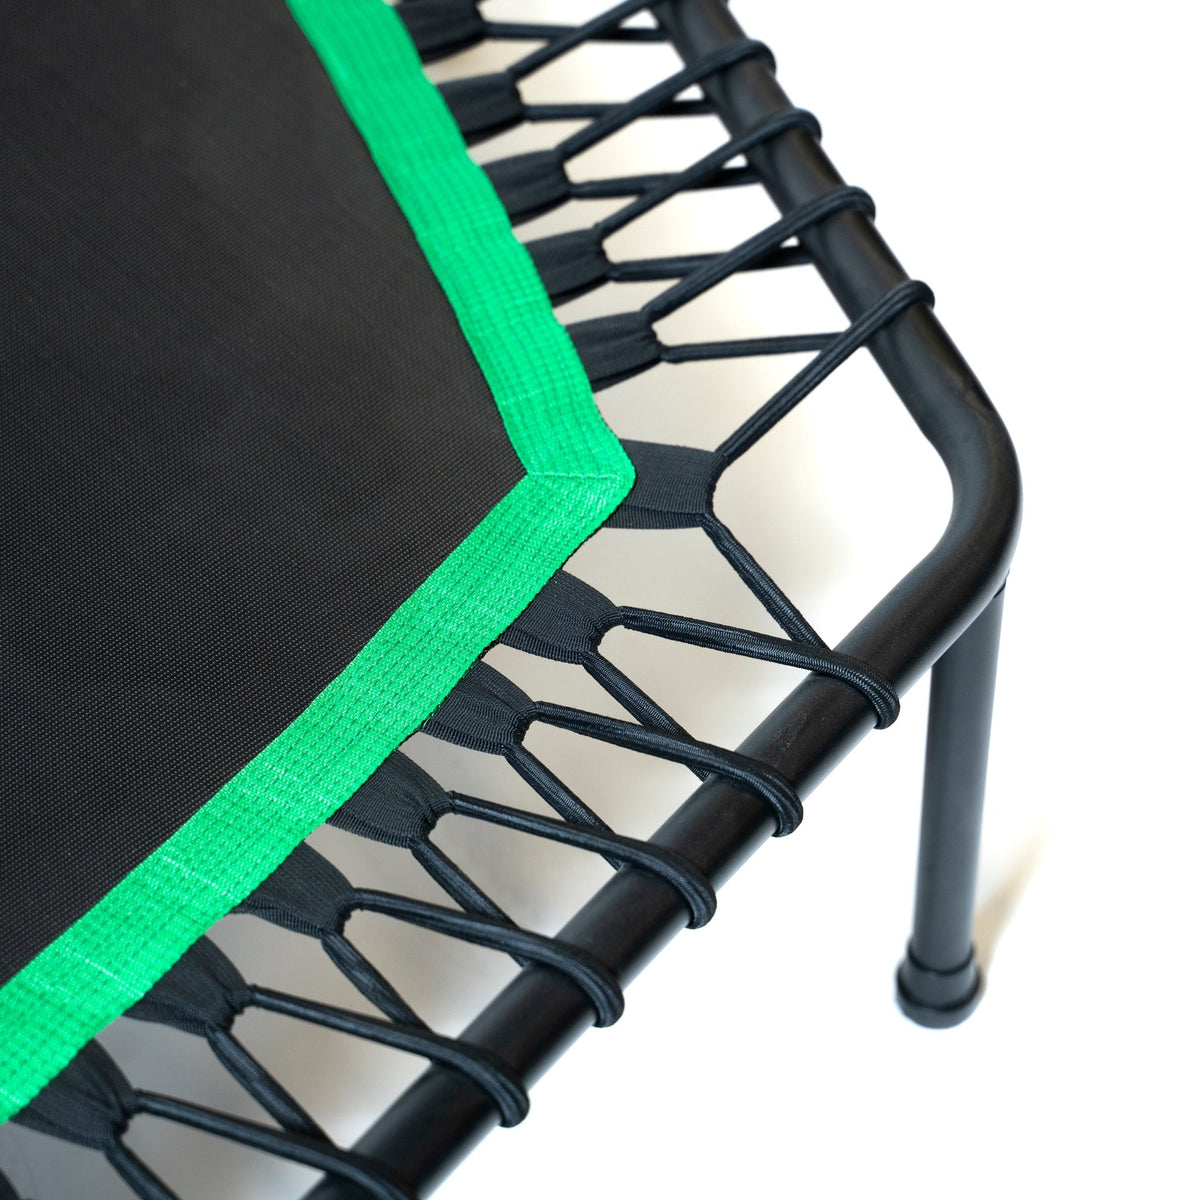 FitWay Equip. FITWAY 53&#39;&#39; Trampoline - Fitness Experience